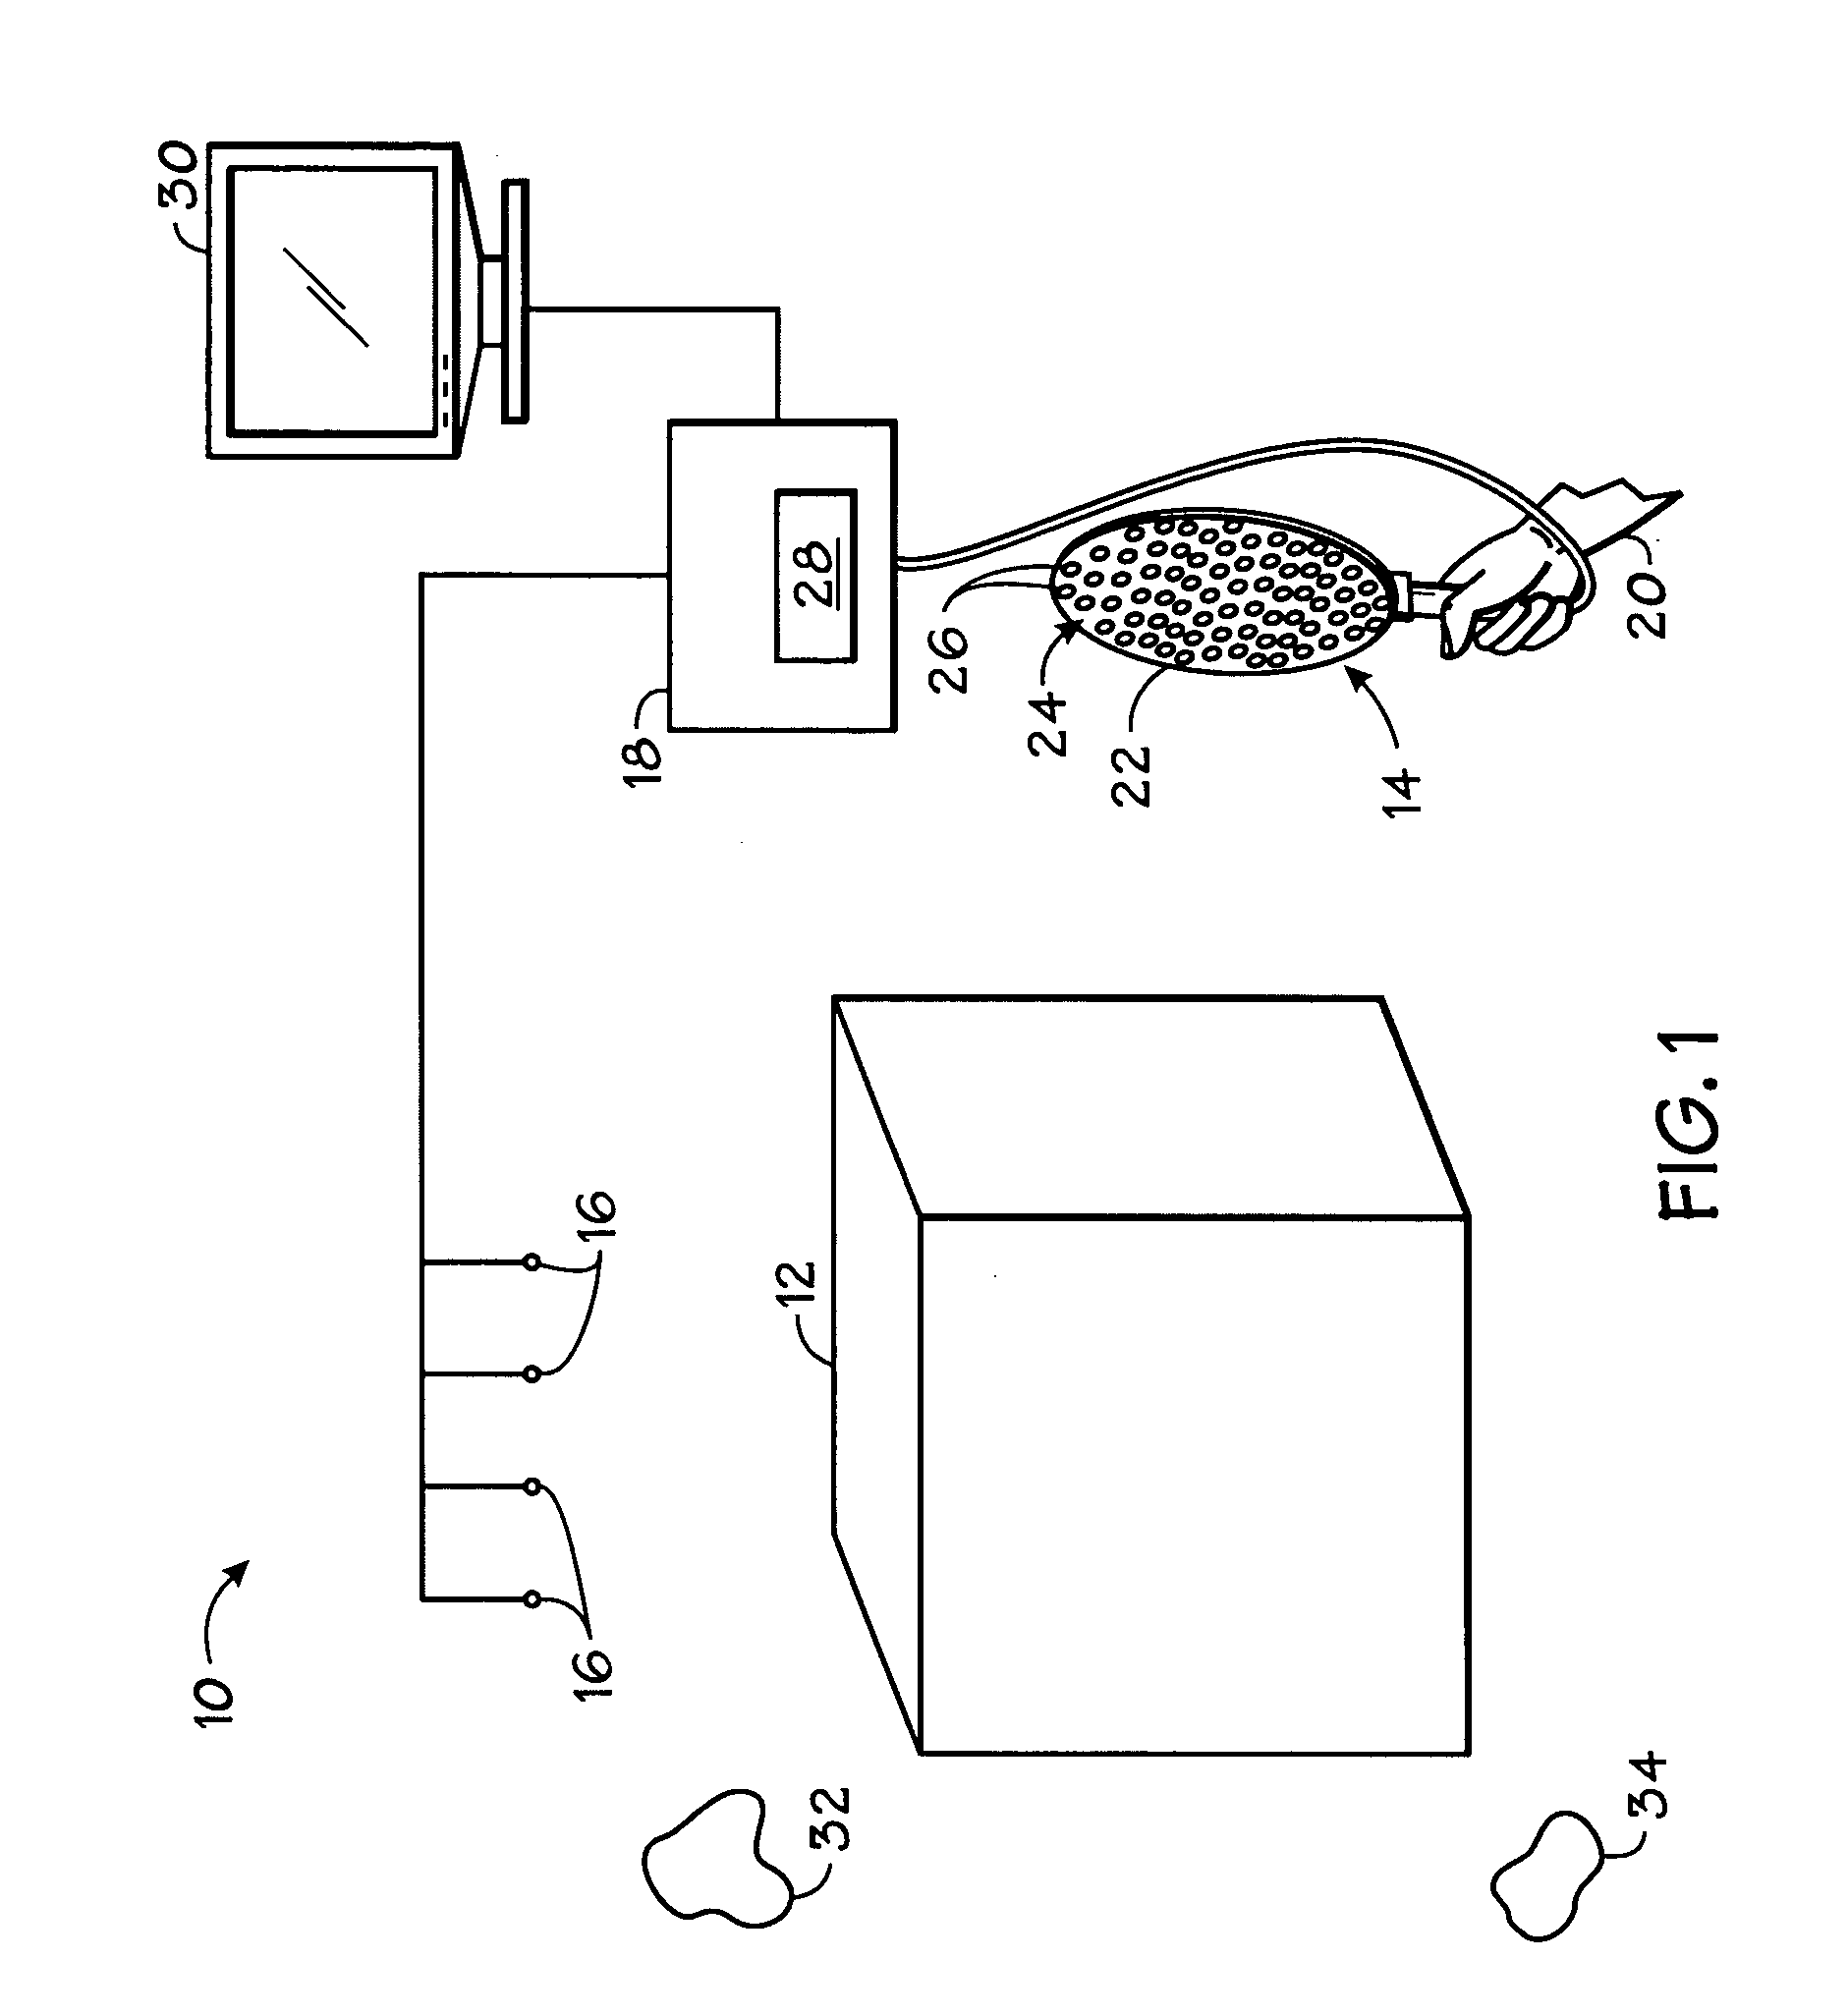 Multi-sensor distortion mapping method and system